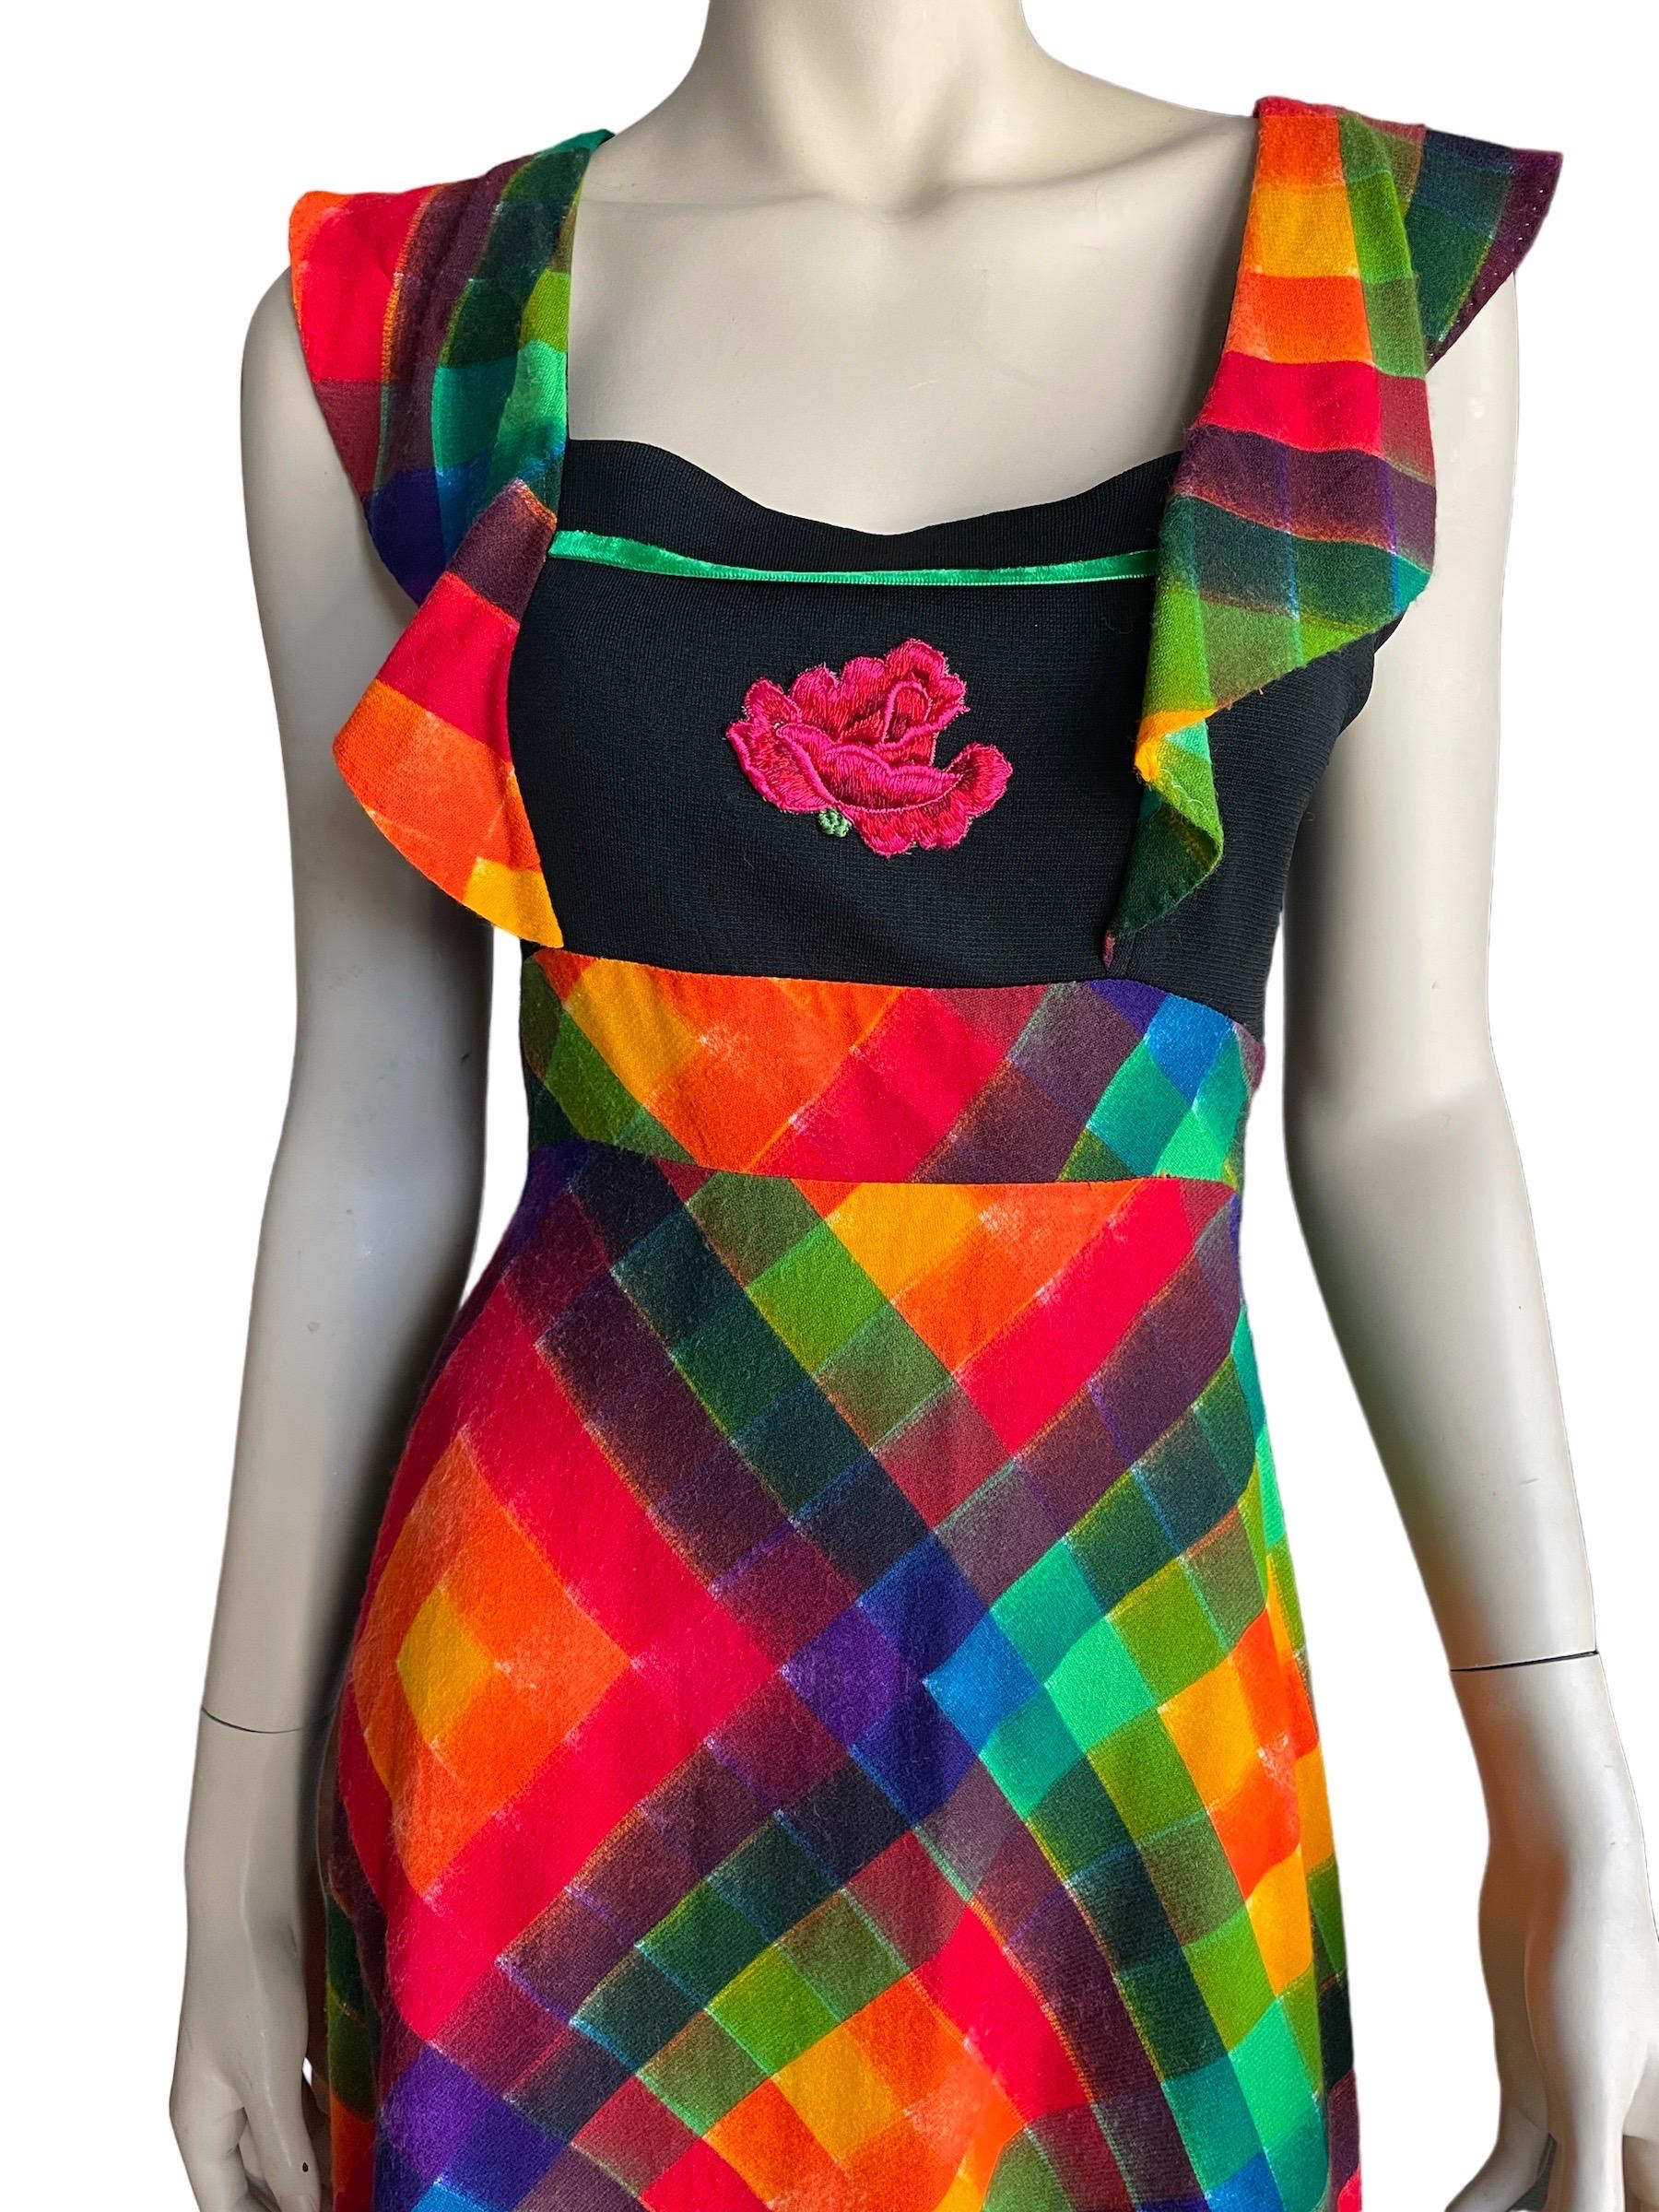 1970s Rainbow Plaid Rose Appliqué Sleeveless Maxi Dress 

A beautiful and colorful 1970s sleeveless maxi dress with open tie back. A perfect casual summer or spring dress. 